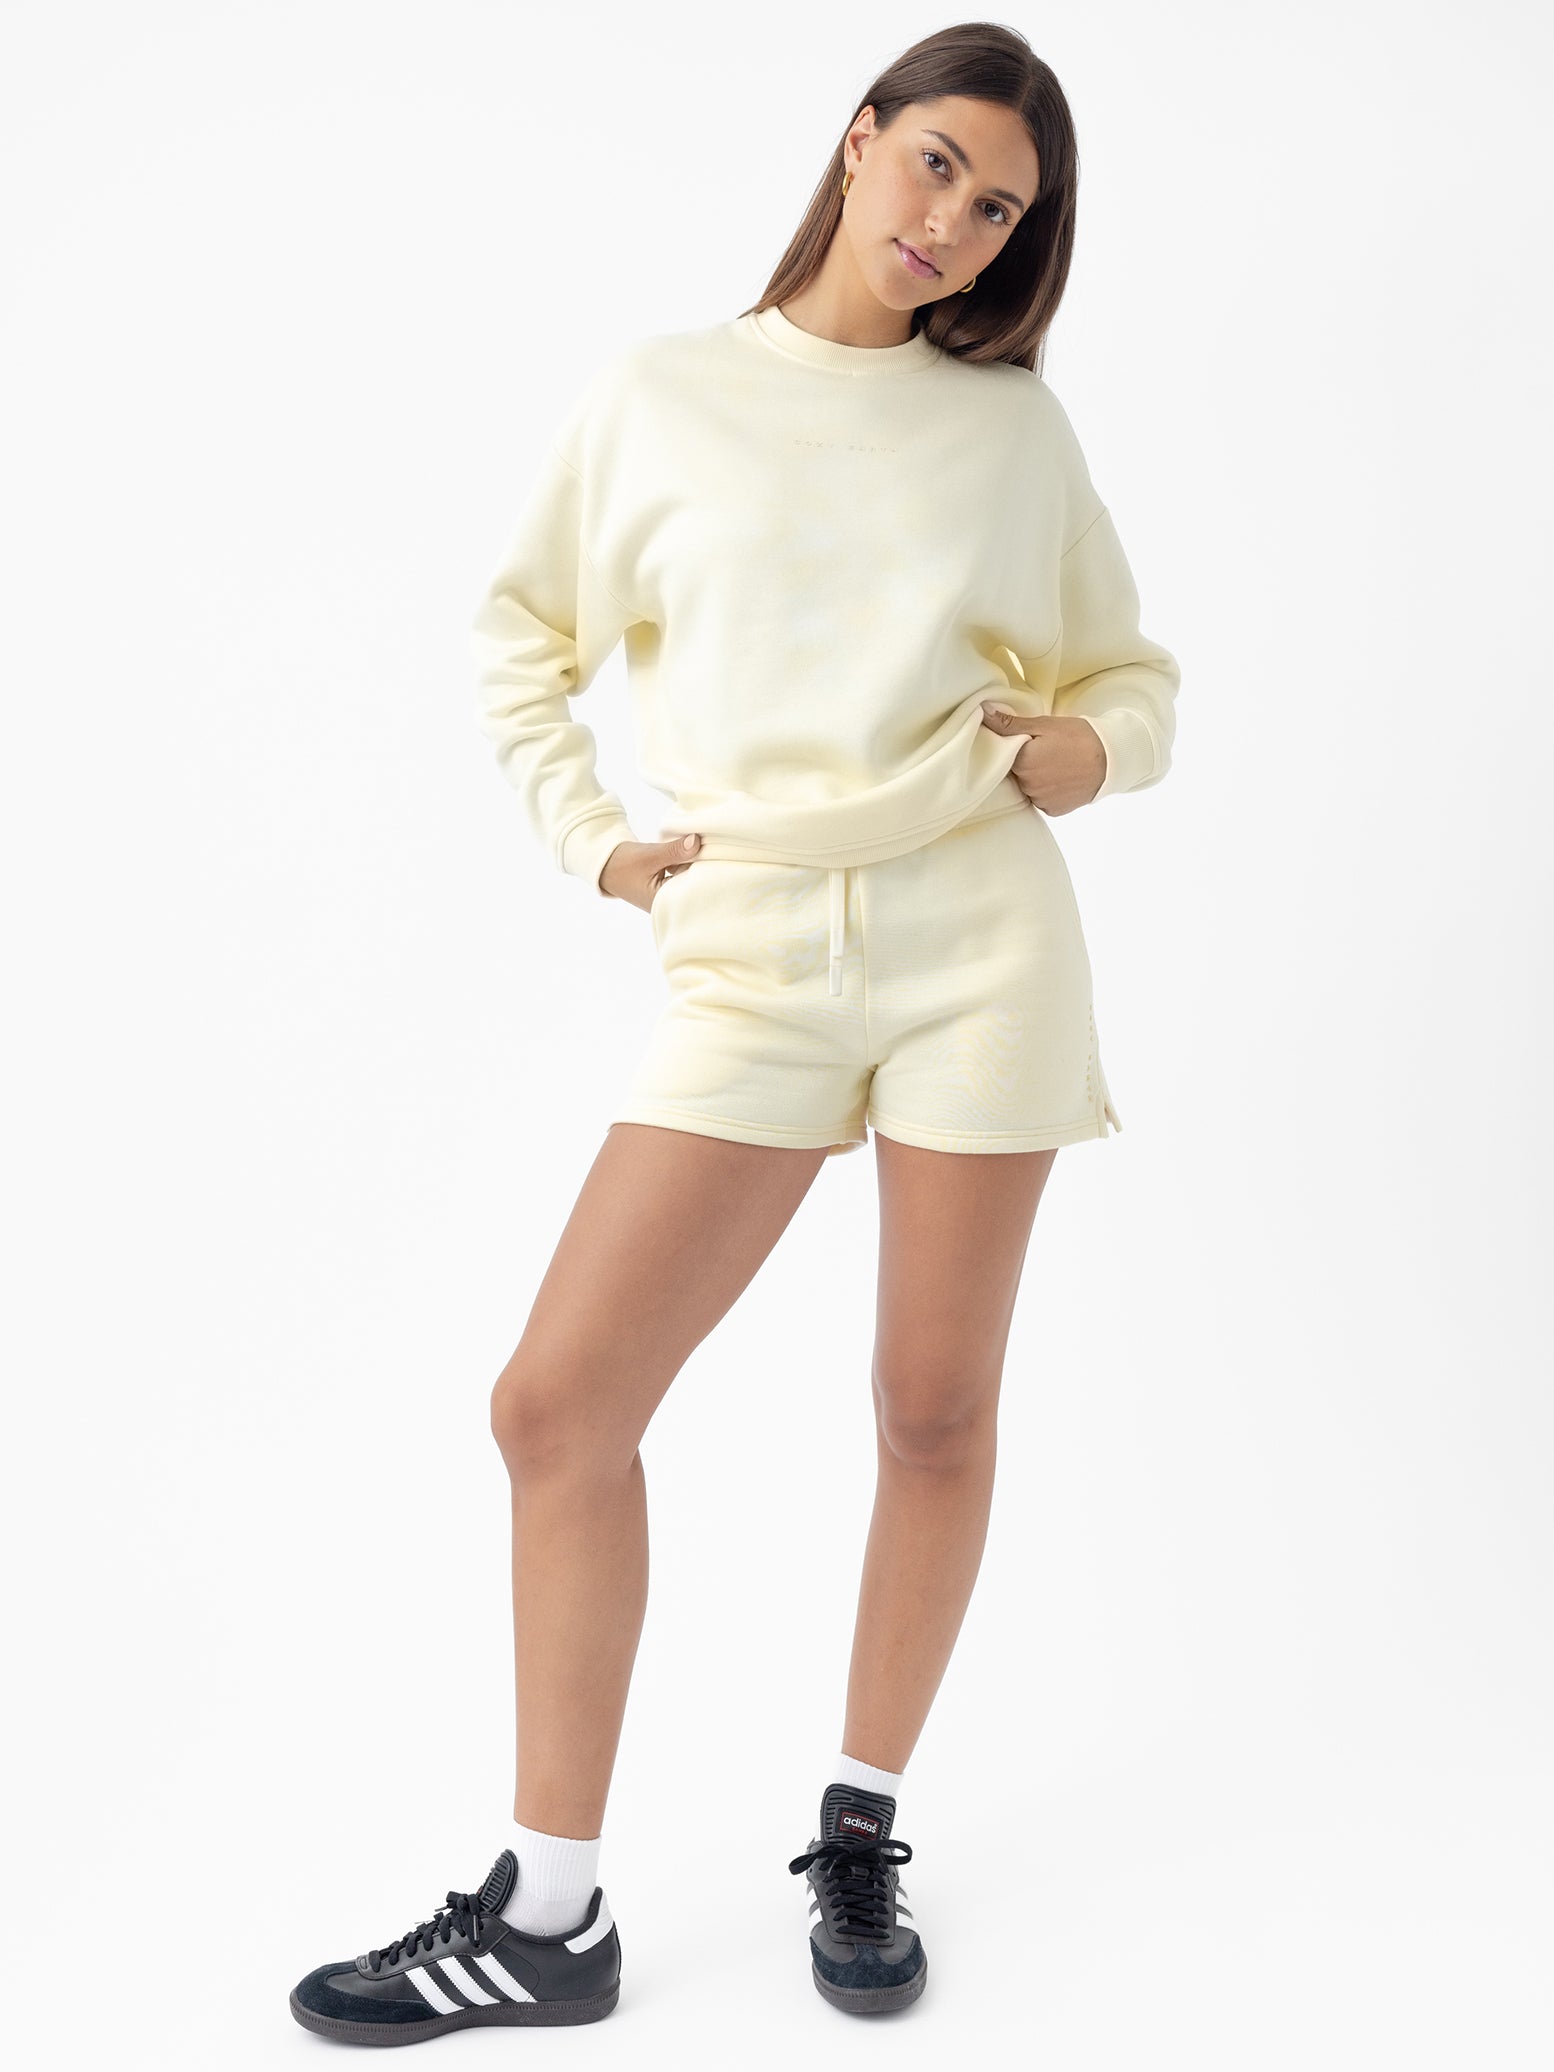 Lemonade CityScape Pullover Crew. The Pullover is being worn by a female model. Accompanying city scape clothing is being worn to complete the look of the outfit. The photo was taken with a white background. 